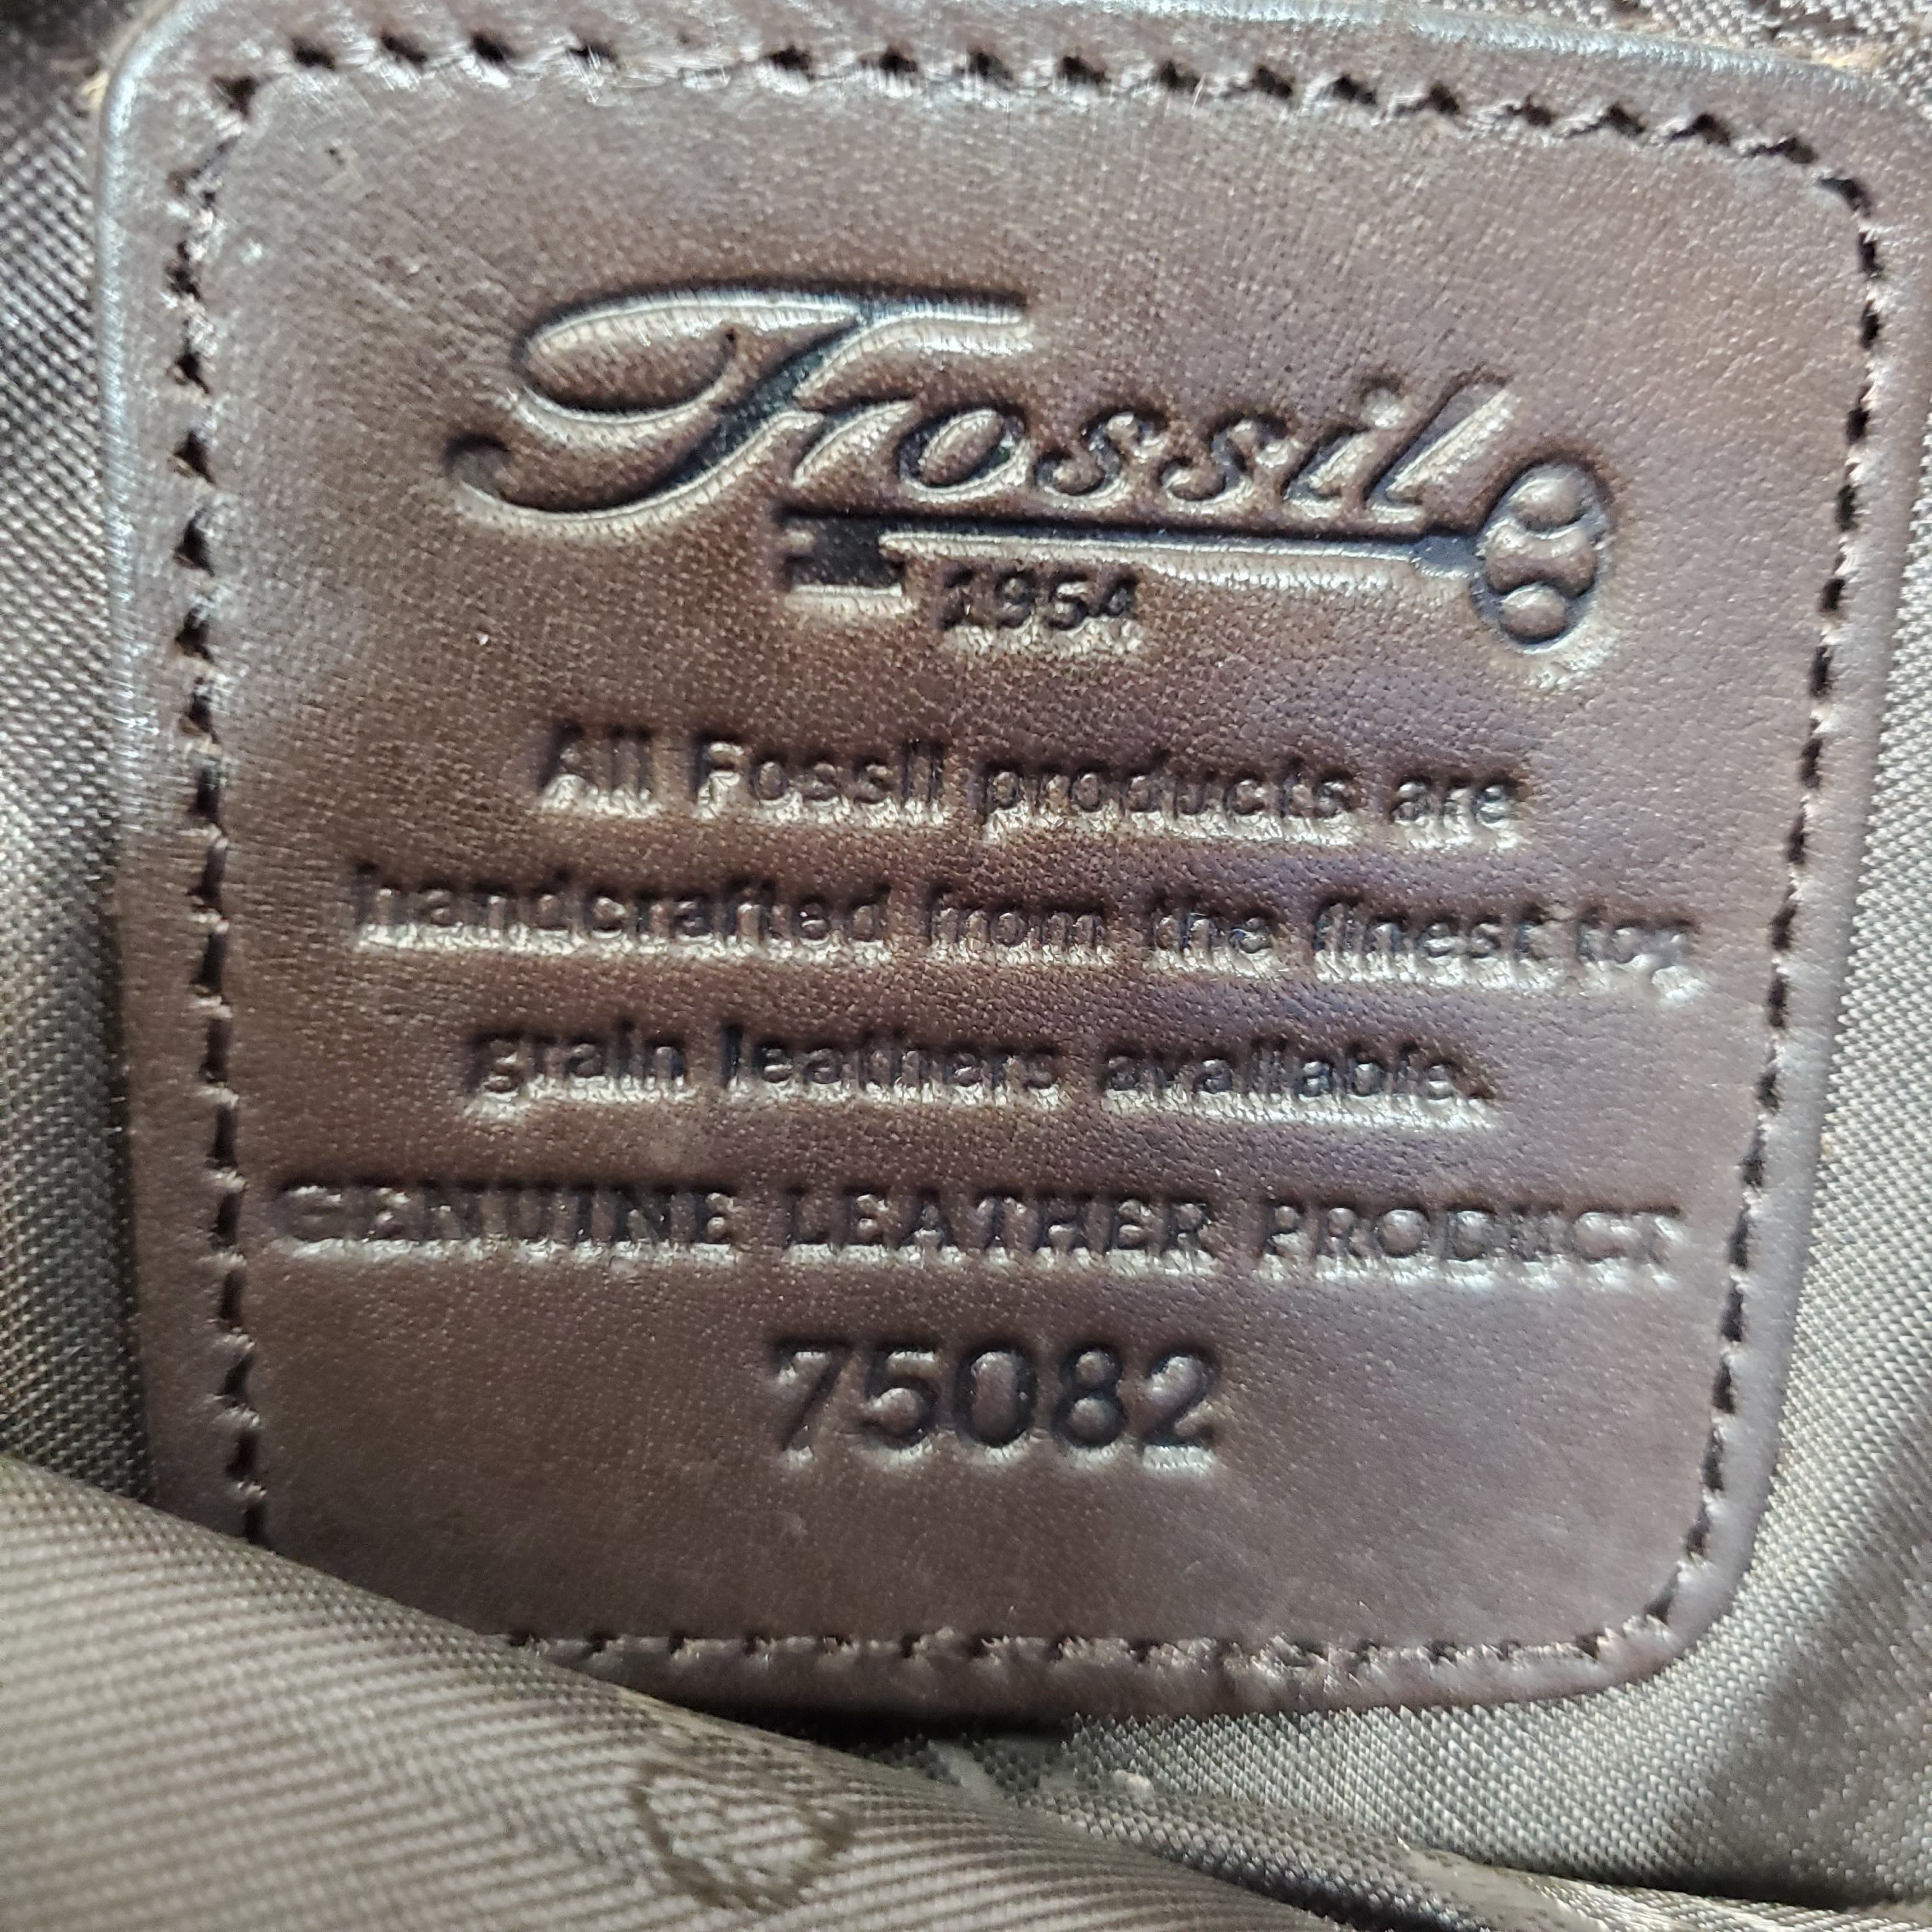 Fossil USA - Watches, Handbags, Jewelry & Accessories